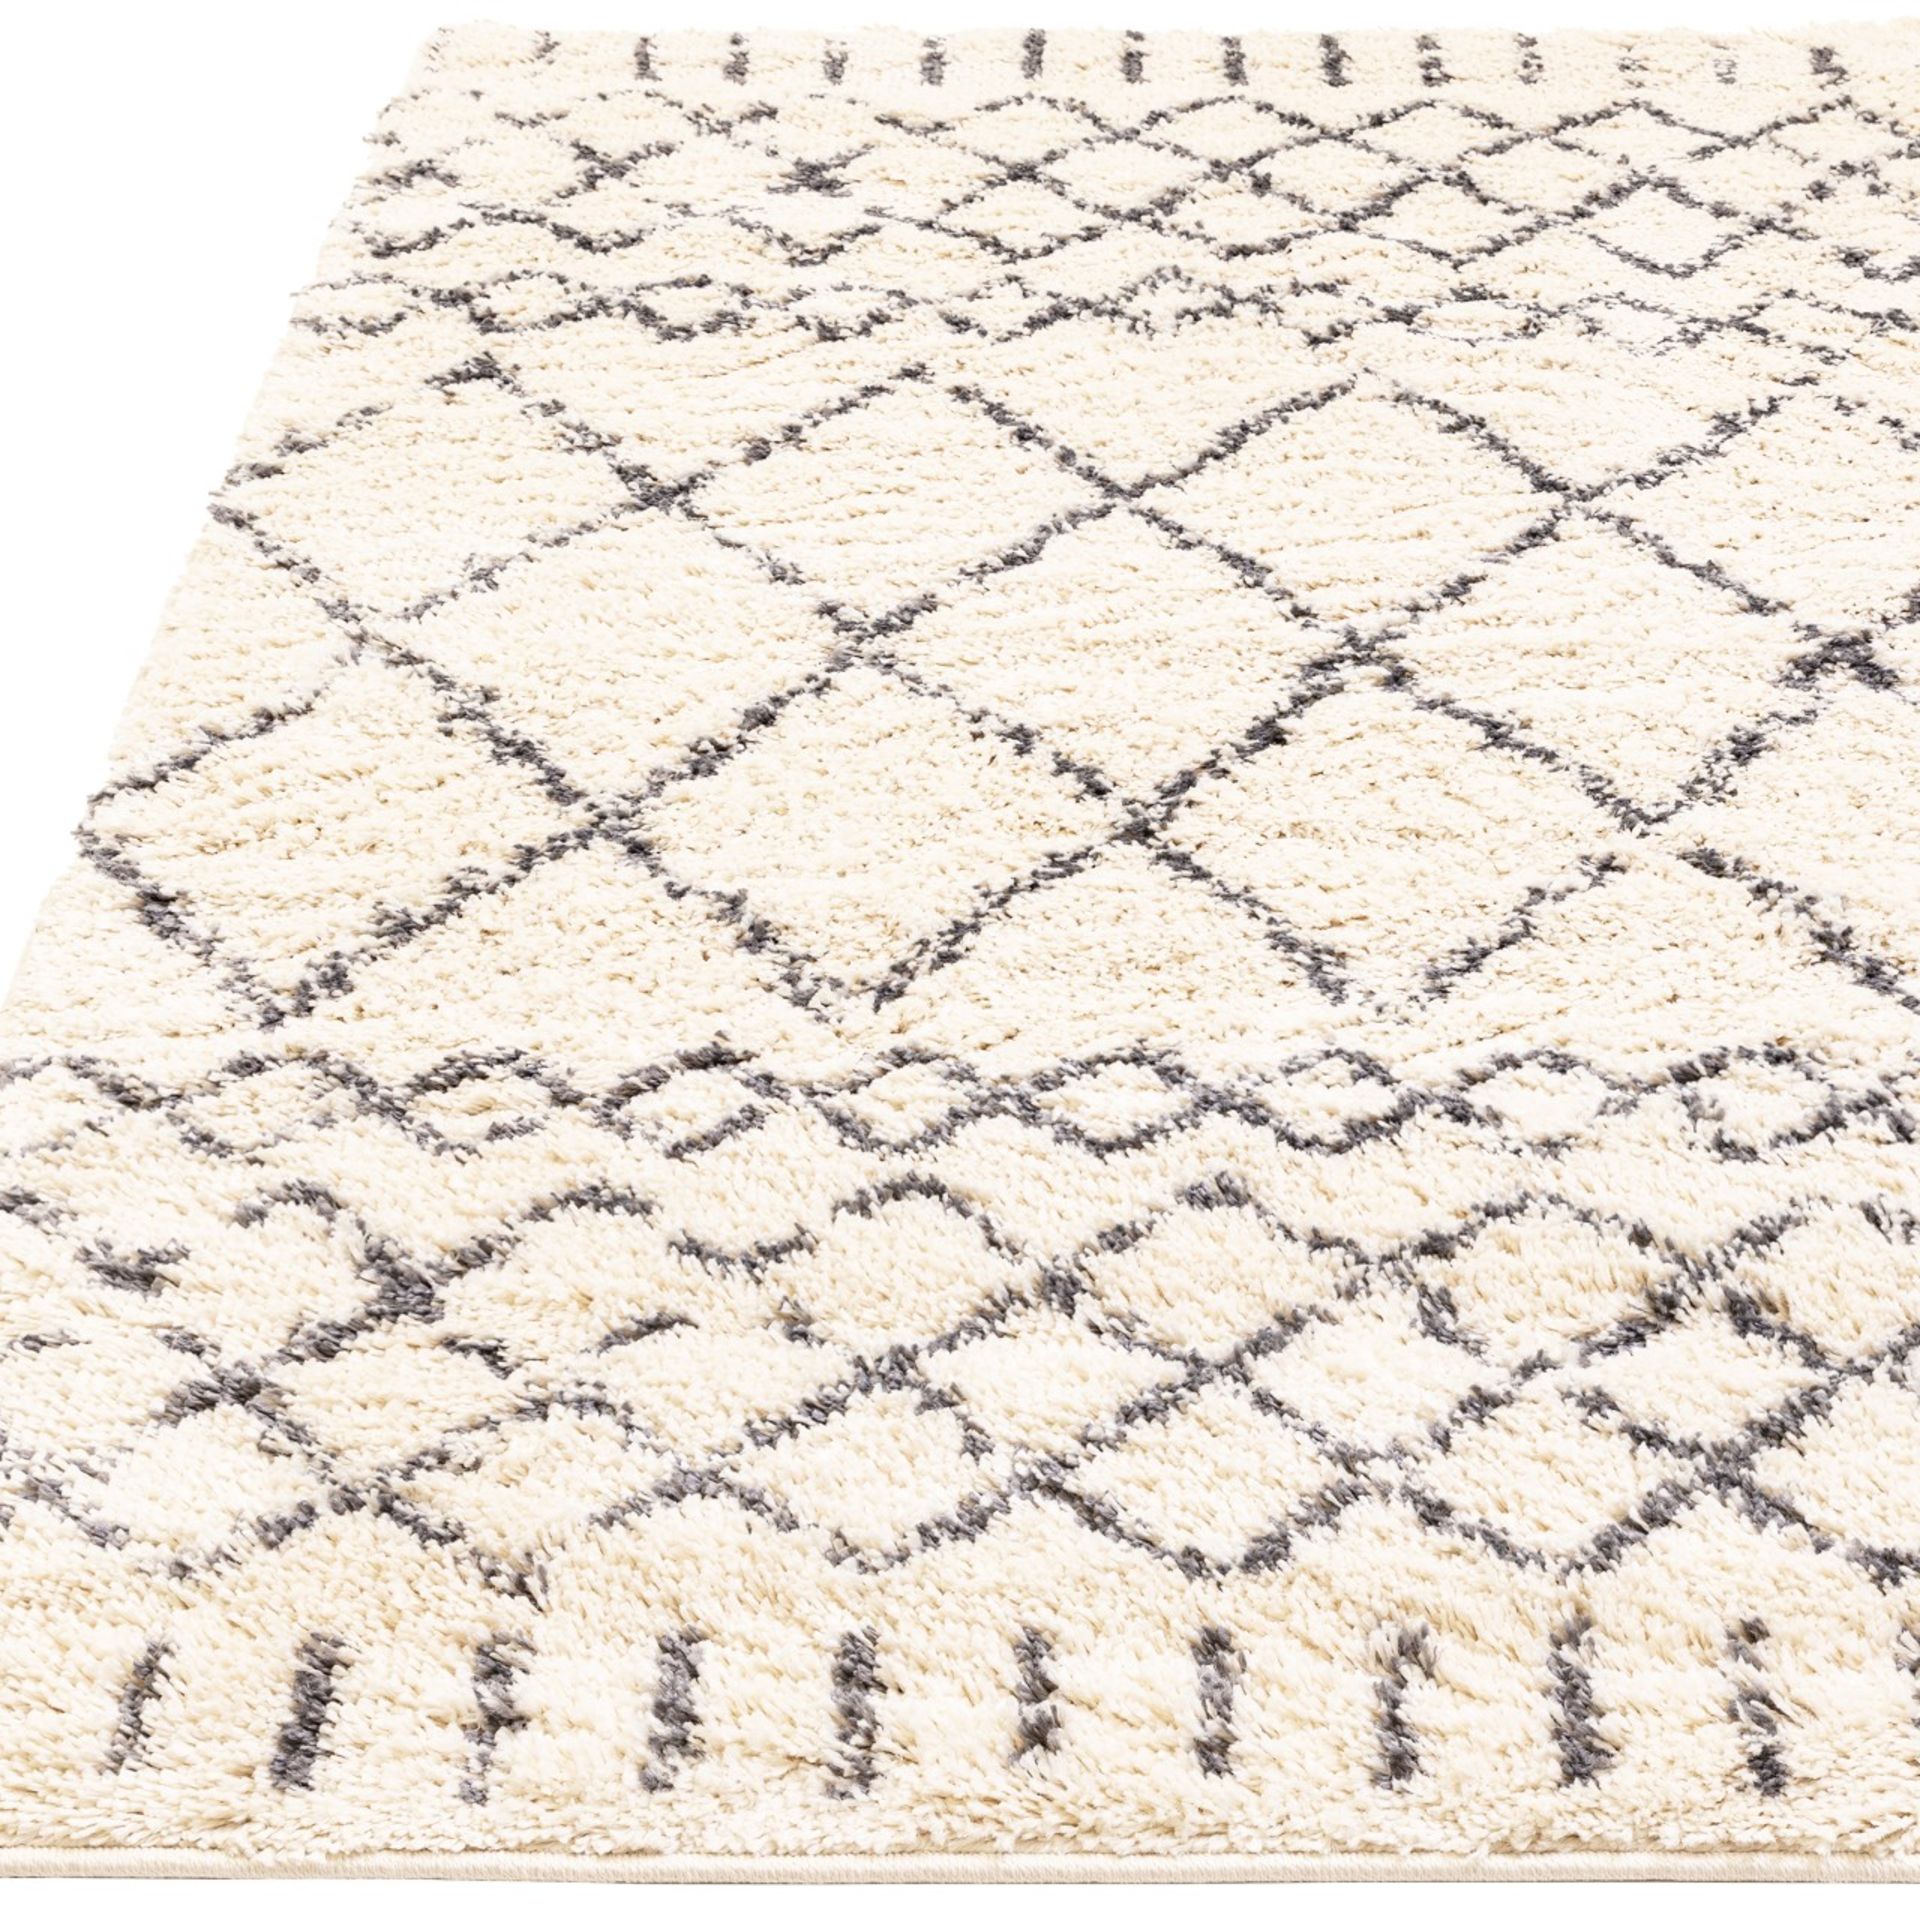 New Nordic 110x160cm Cream & Charcoal - 100% Polypropylene Rug - £10 Delivery - Image 2 of 3